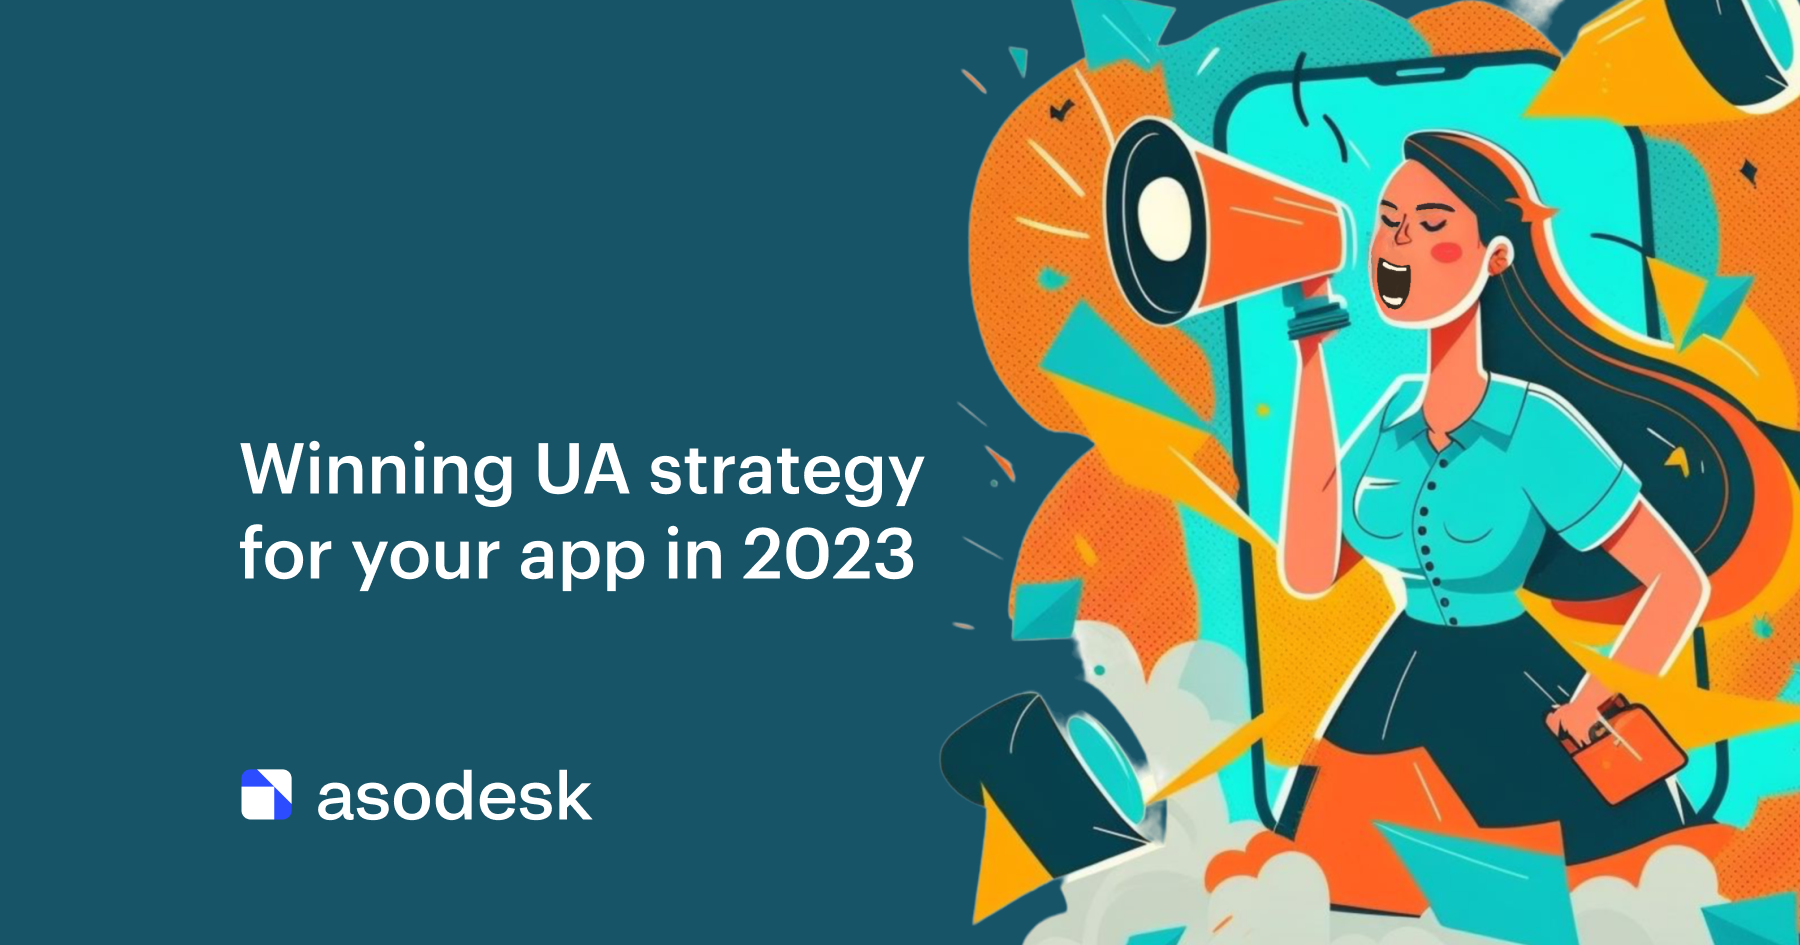 Winning UA strategy for your app in 2023